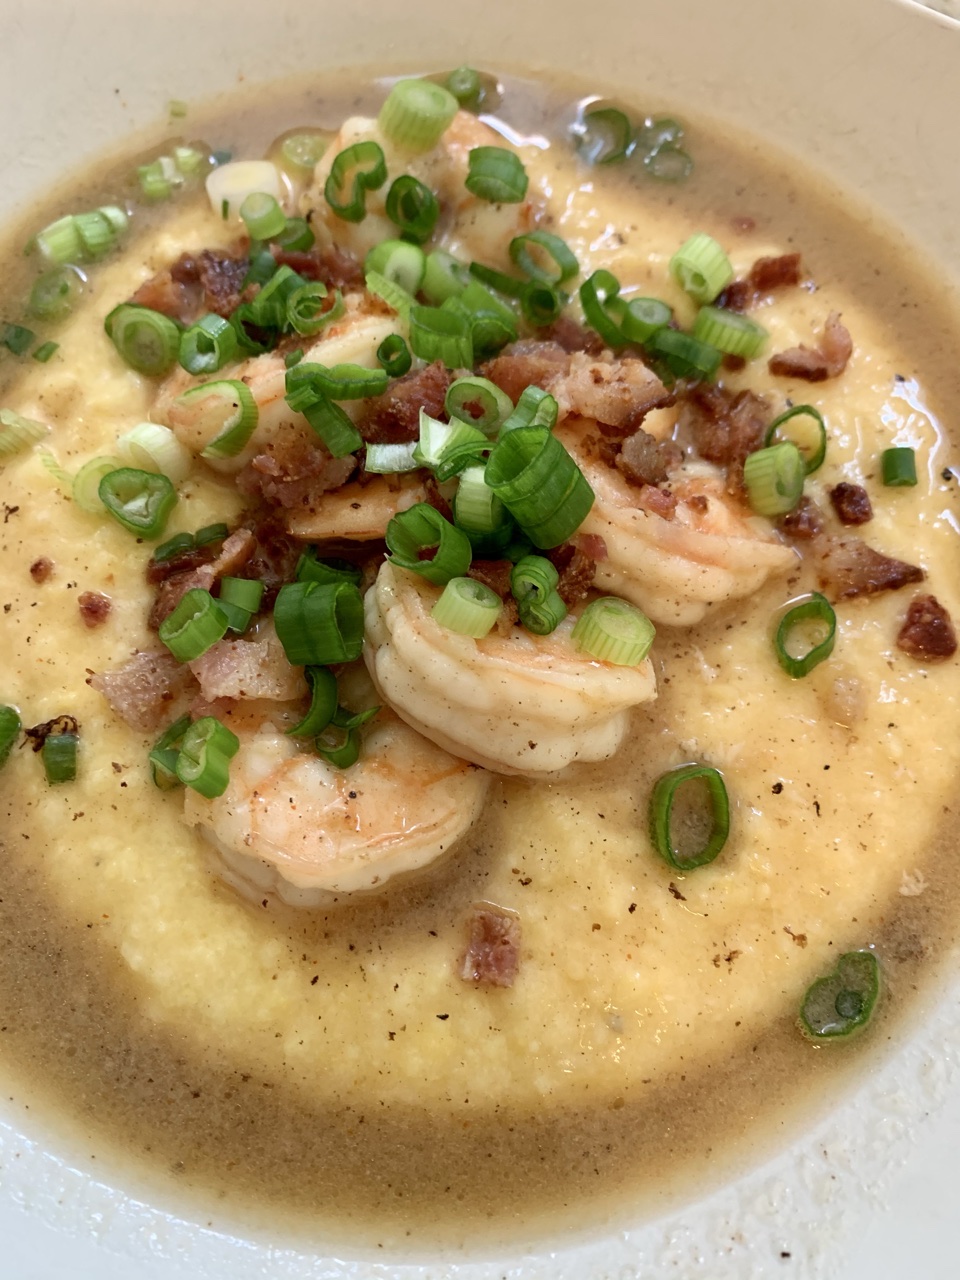 Let’s Make Scrumptious AND Easy Shrimp & Grits